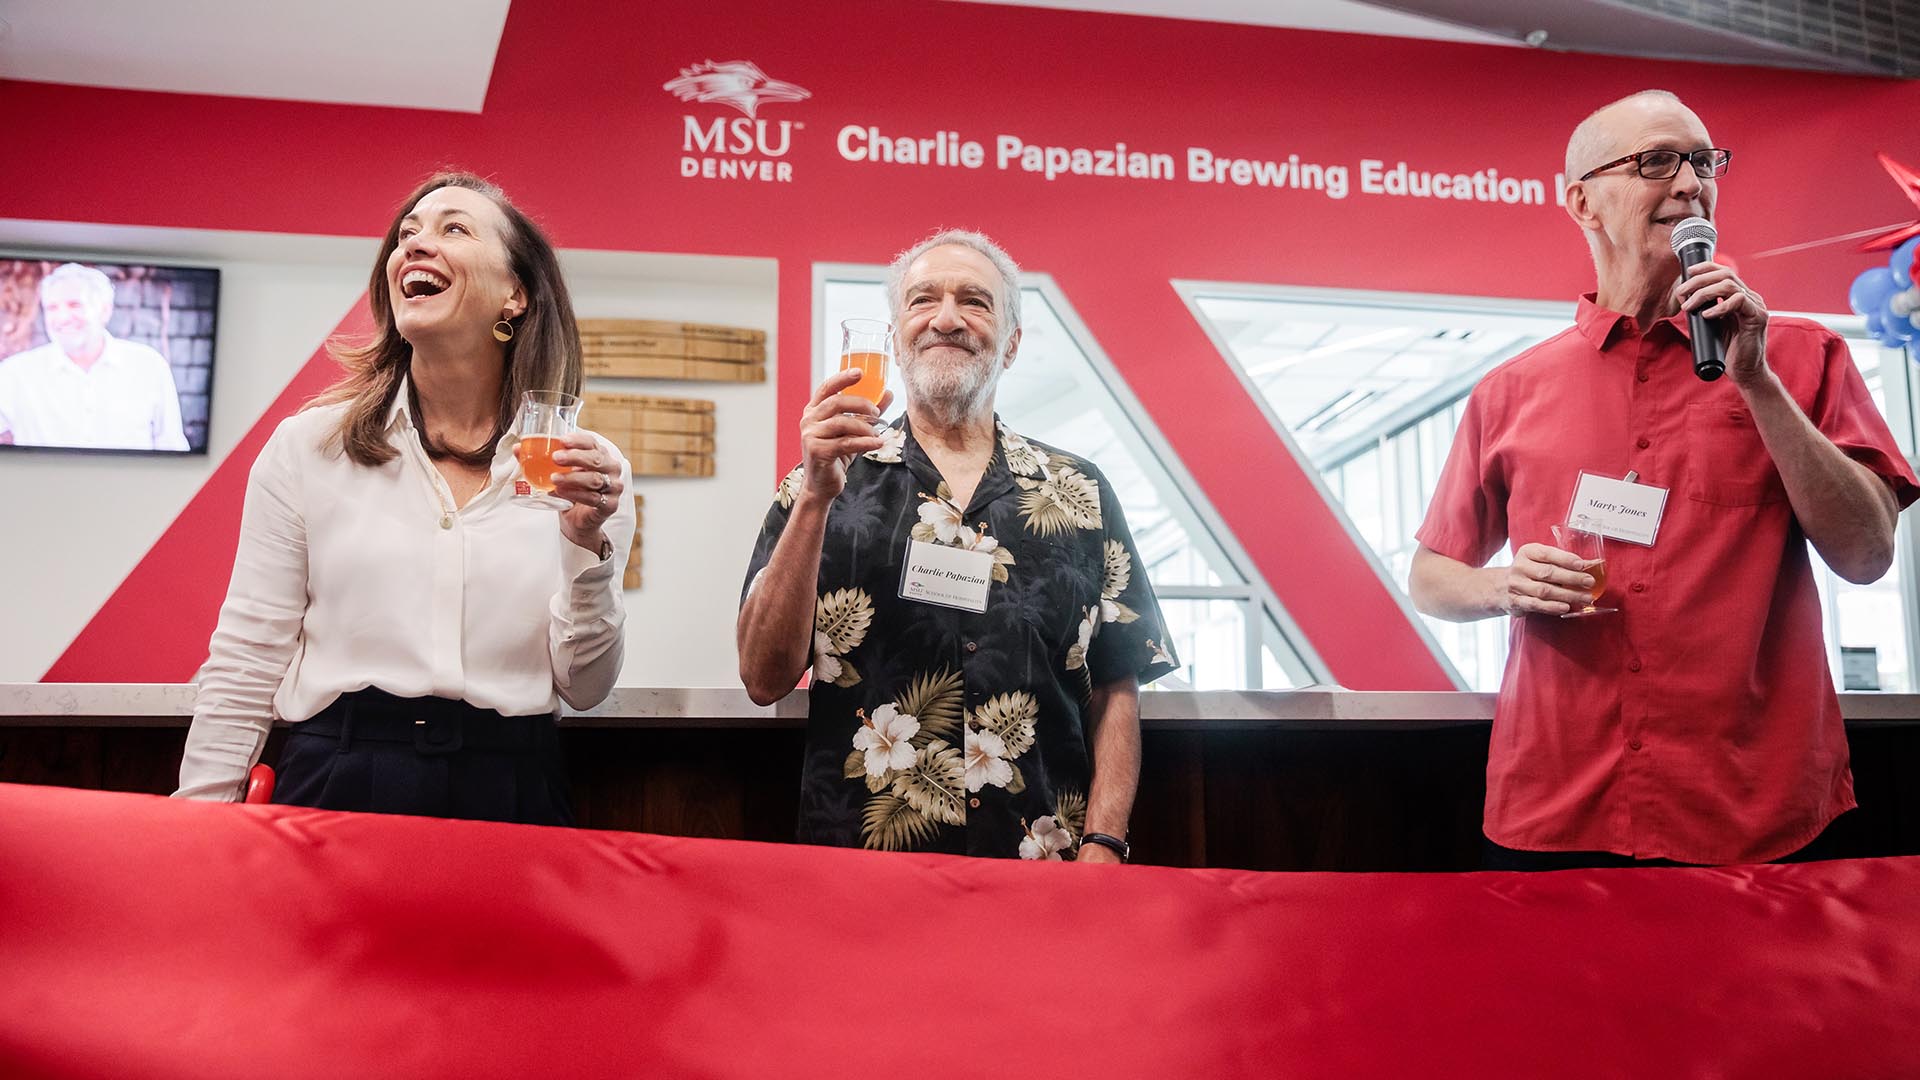 Dr. Davidson, Charlie Papazian, and another person cheersing in the new brewing education lab